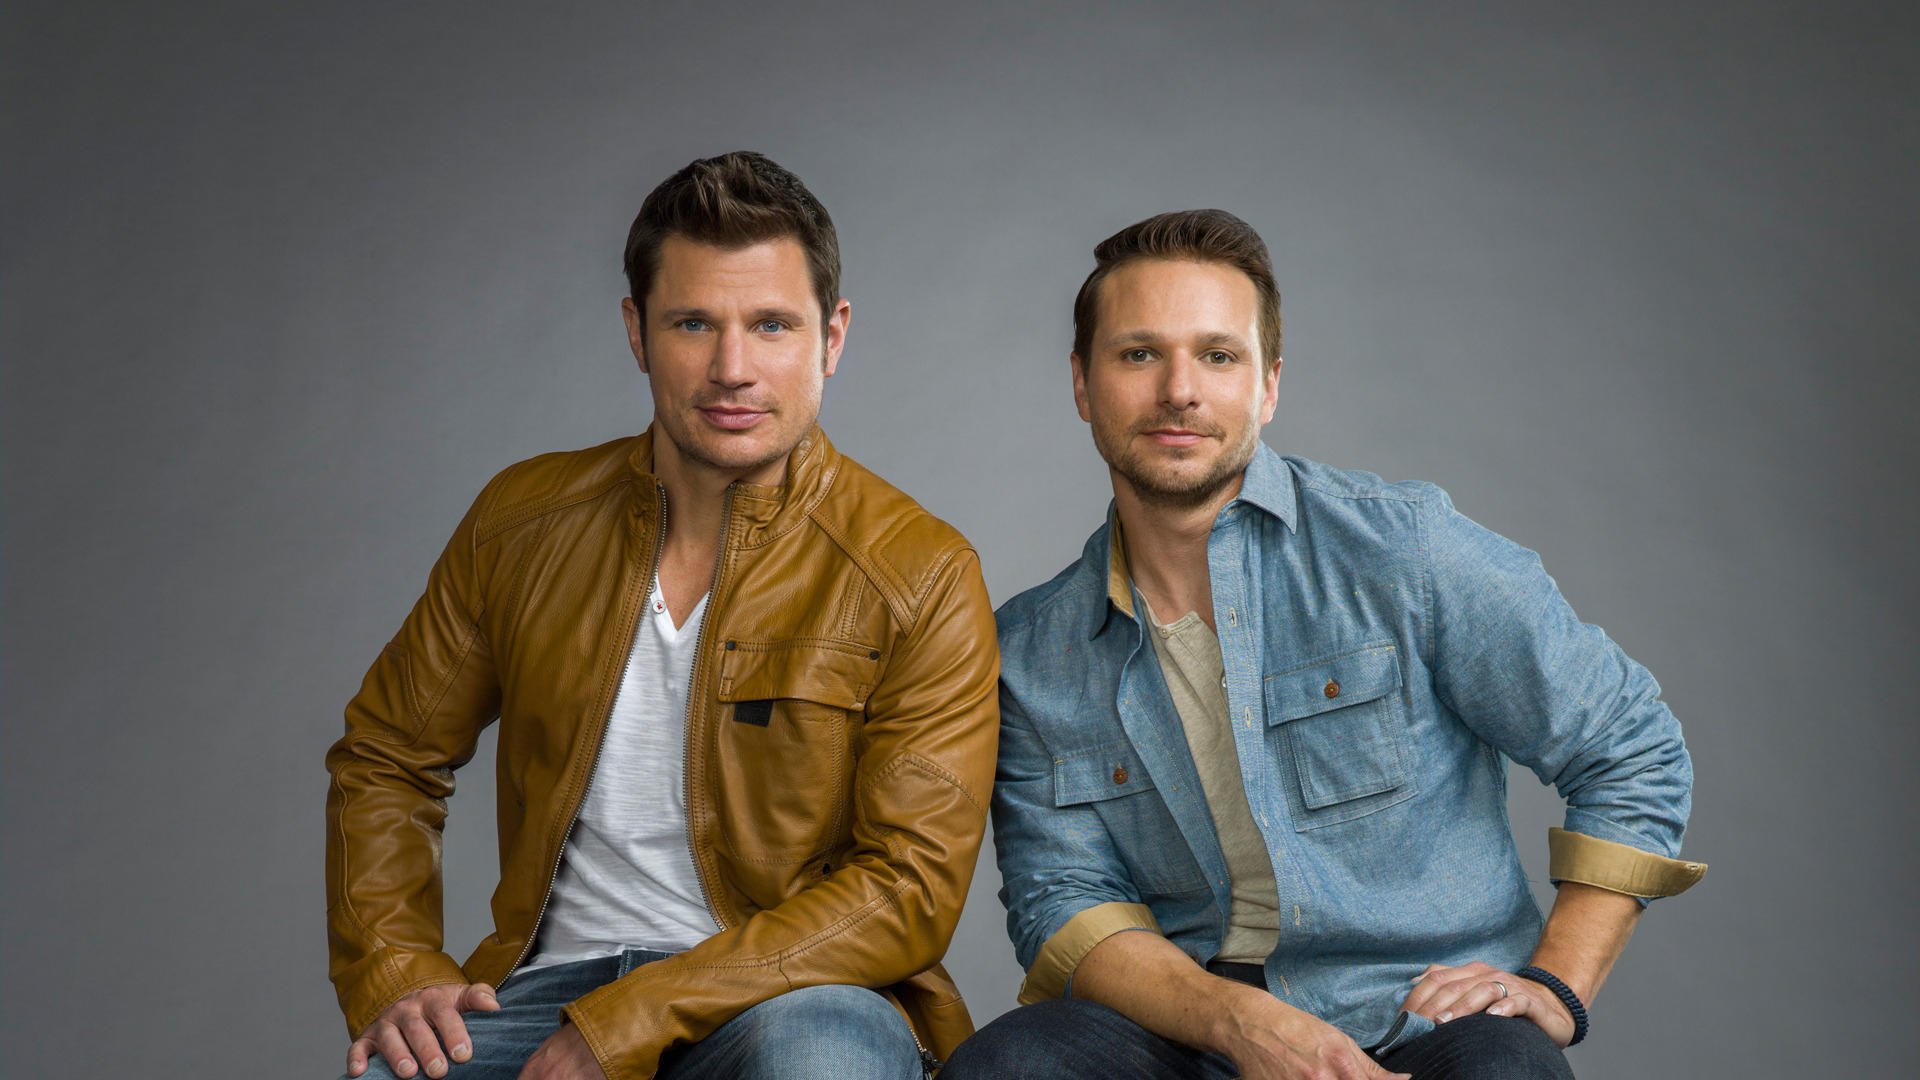 What Happened To Nick Lachey's Boy Band '98 Degrees'?